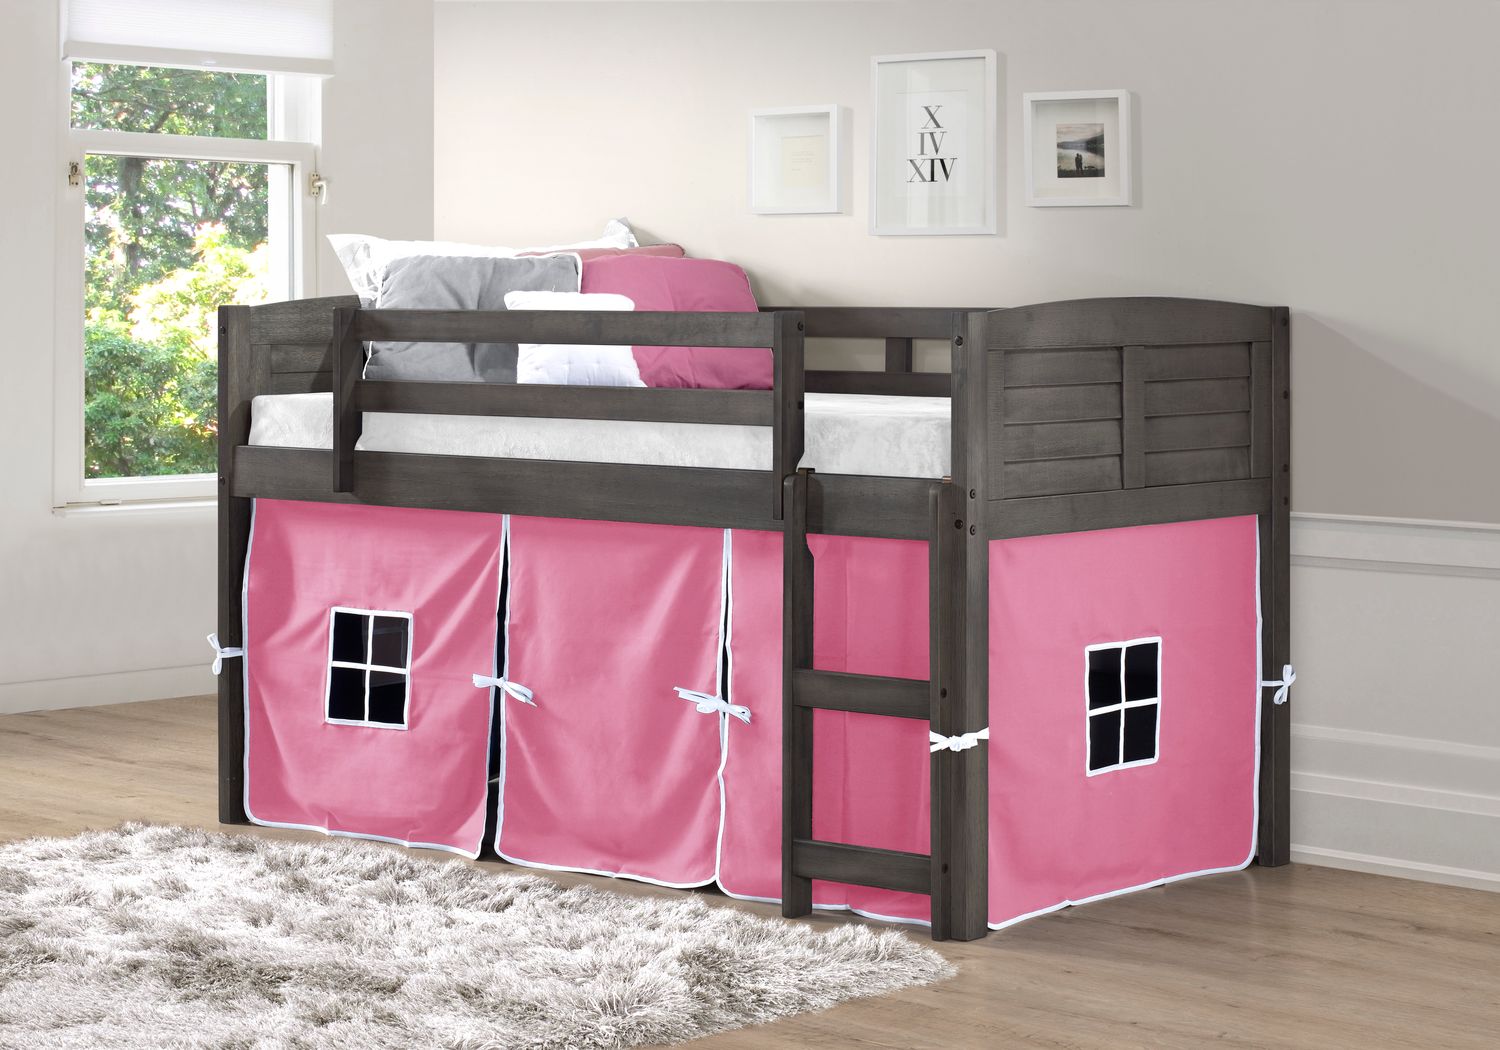 Bunk Beds For Kids, Rooms To Go Loft Bed With Slide